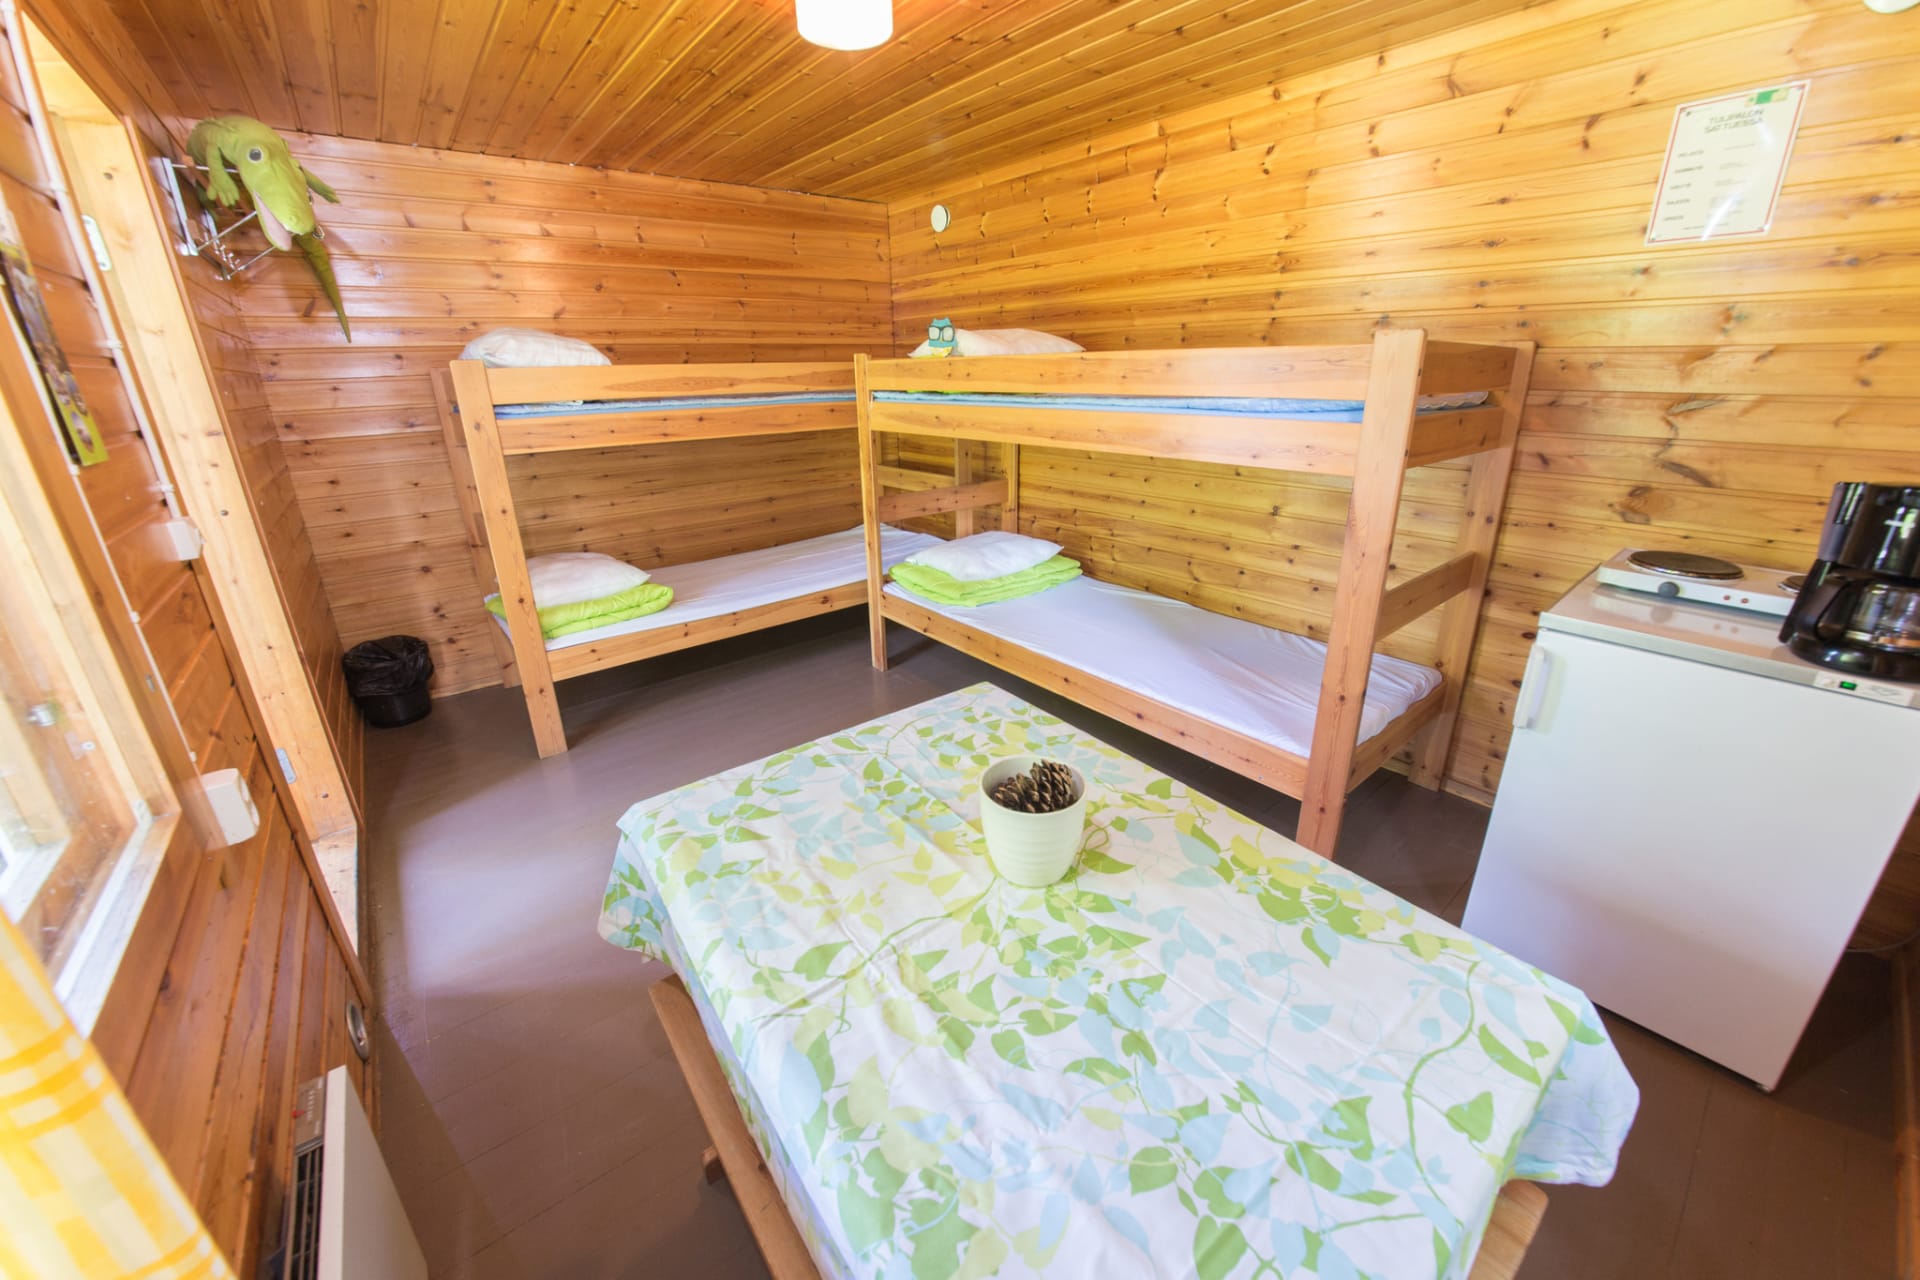 Härmälä Camping has cottages for 4 persons with 2 bunk beds, table, chairs and fridge